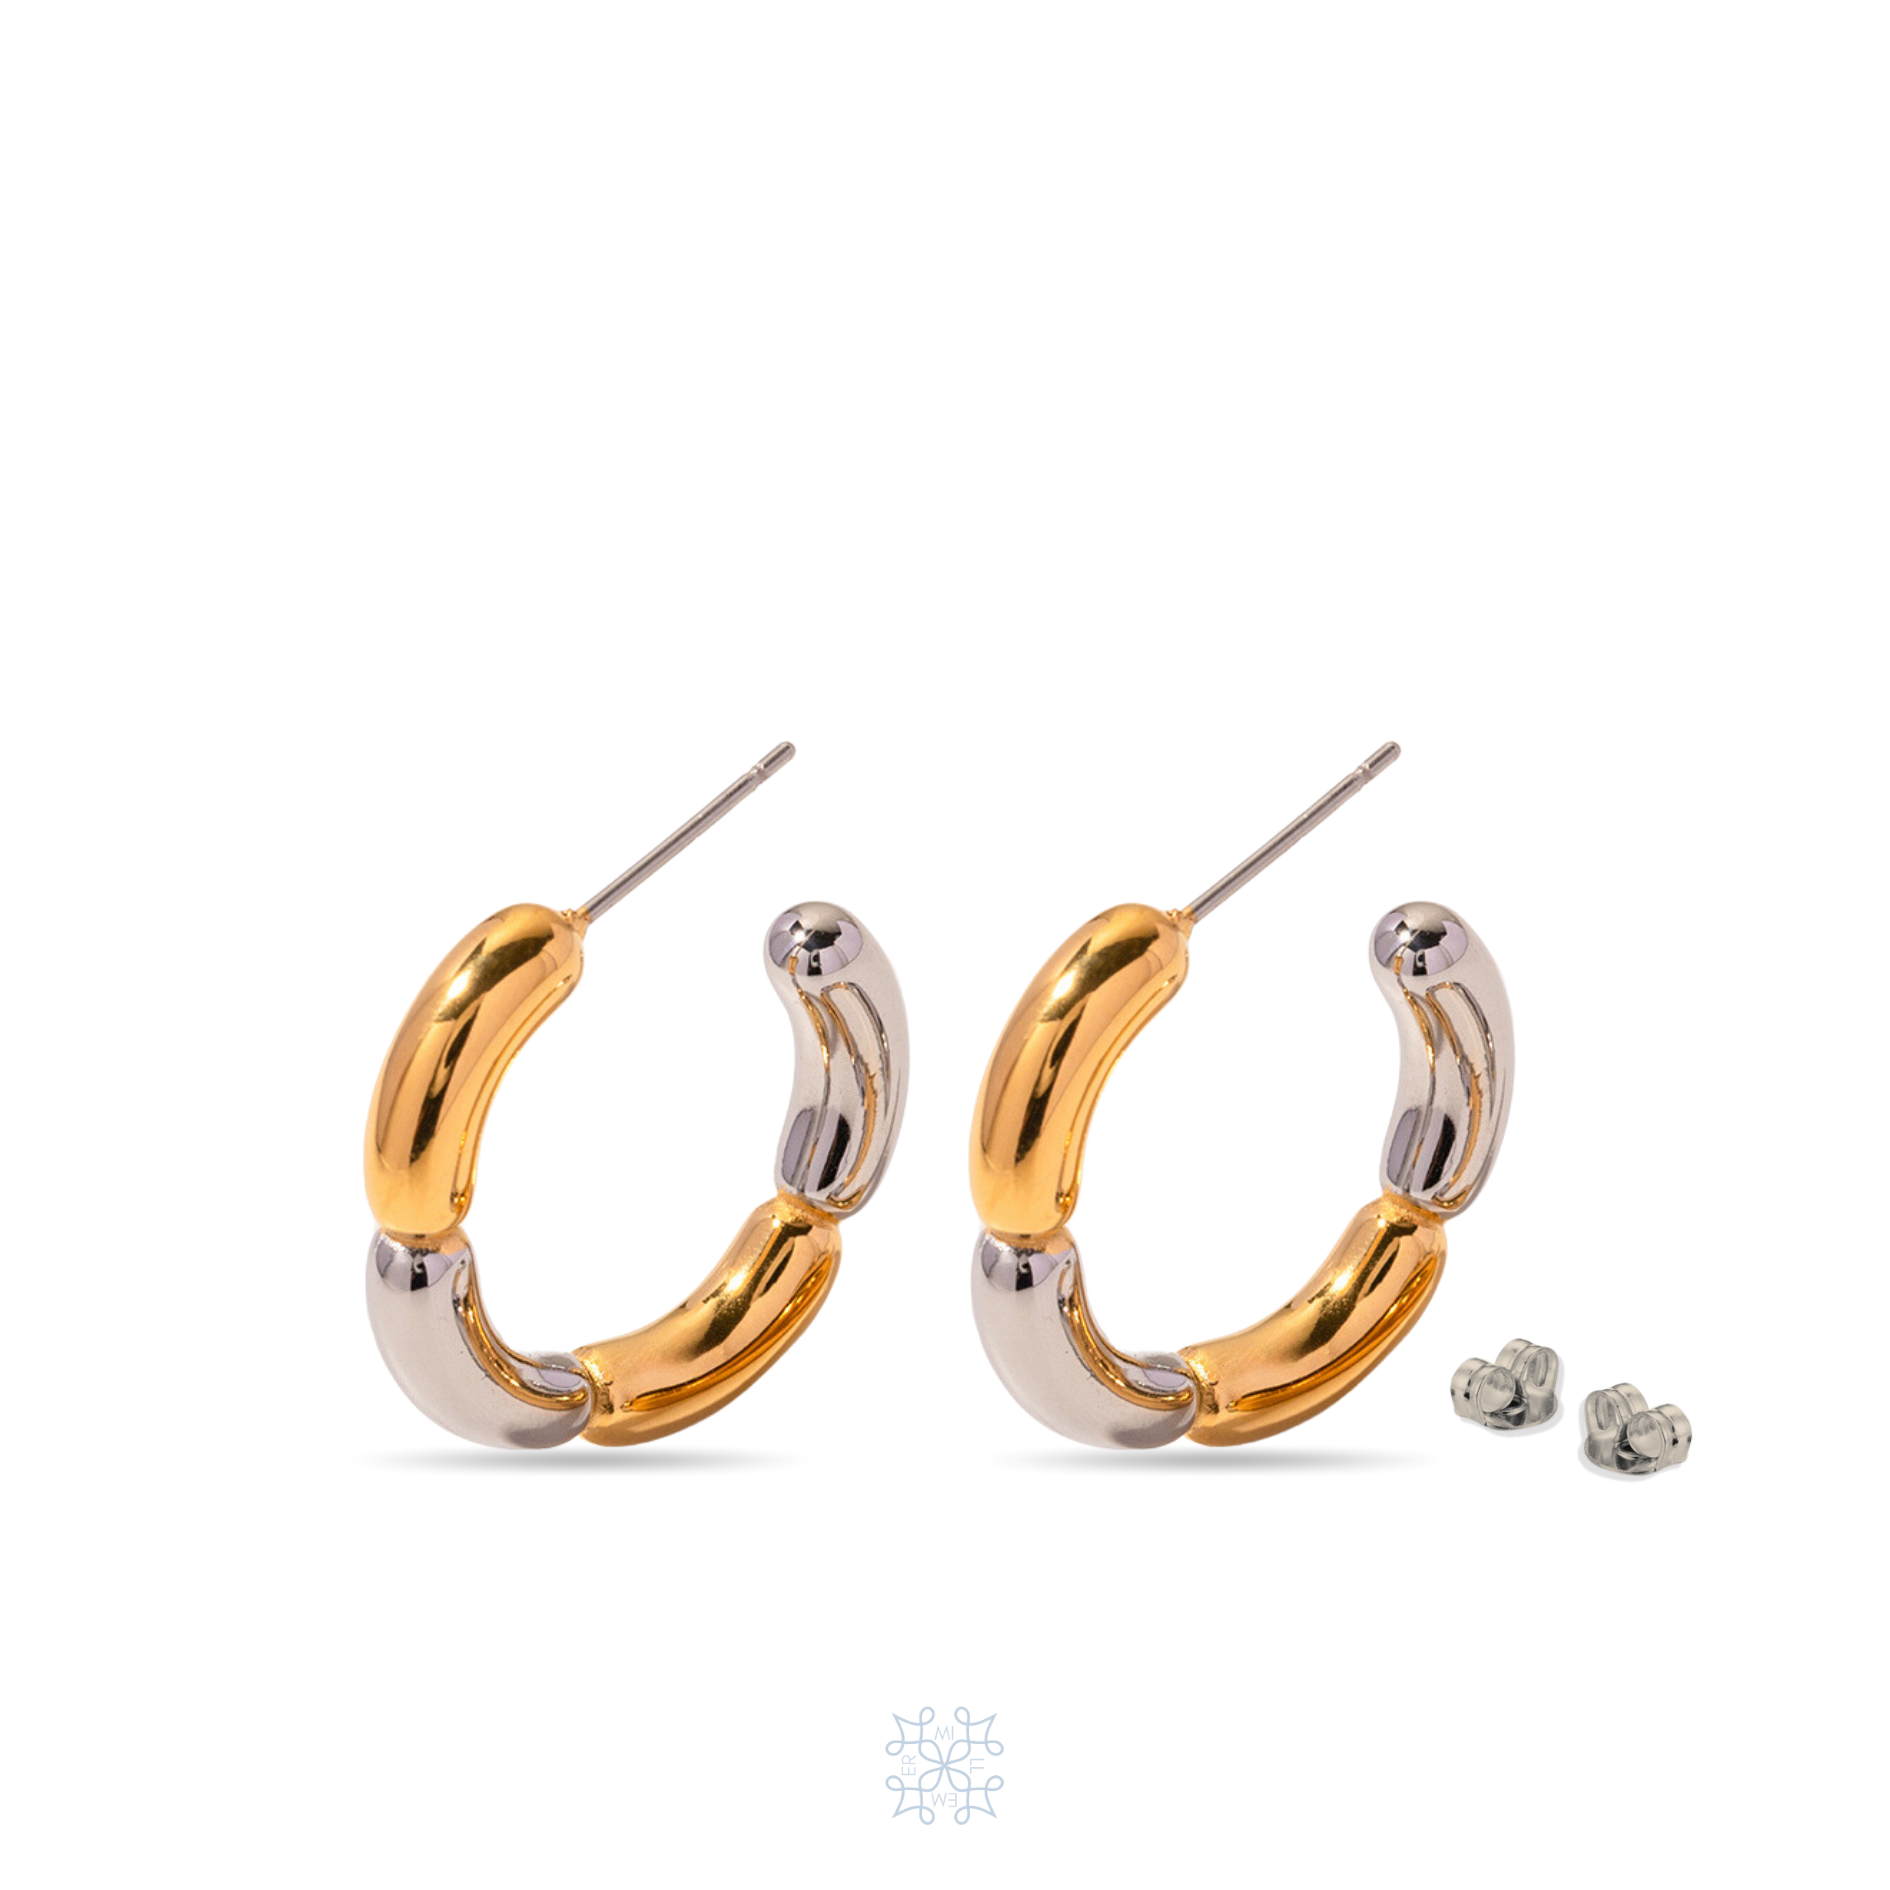 Gold and Silver Hoop earrings divided on chunky segments plated in gold and silver creating a flower shape.